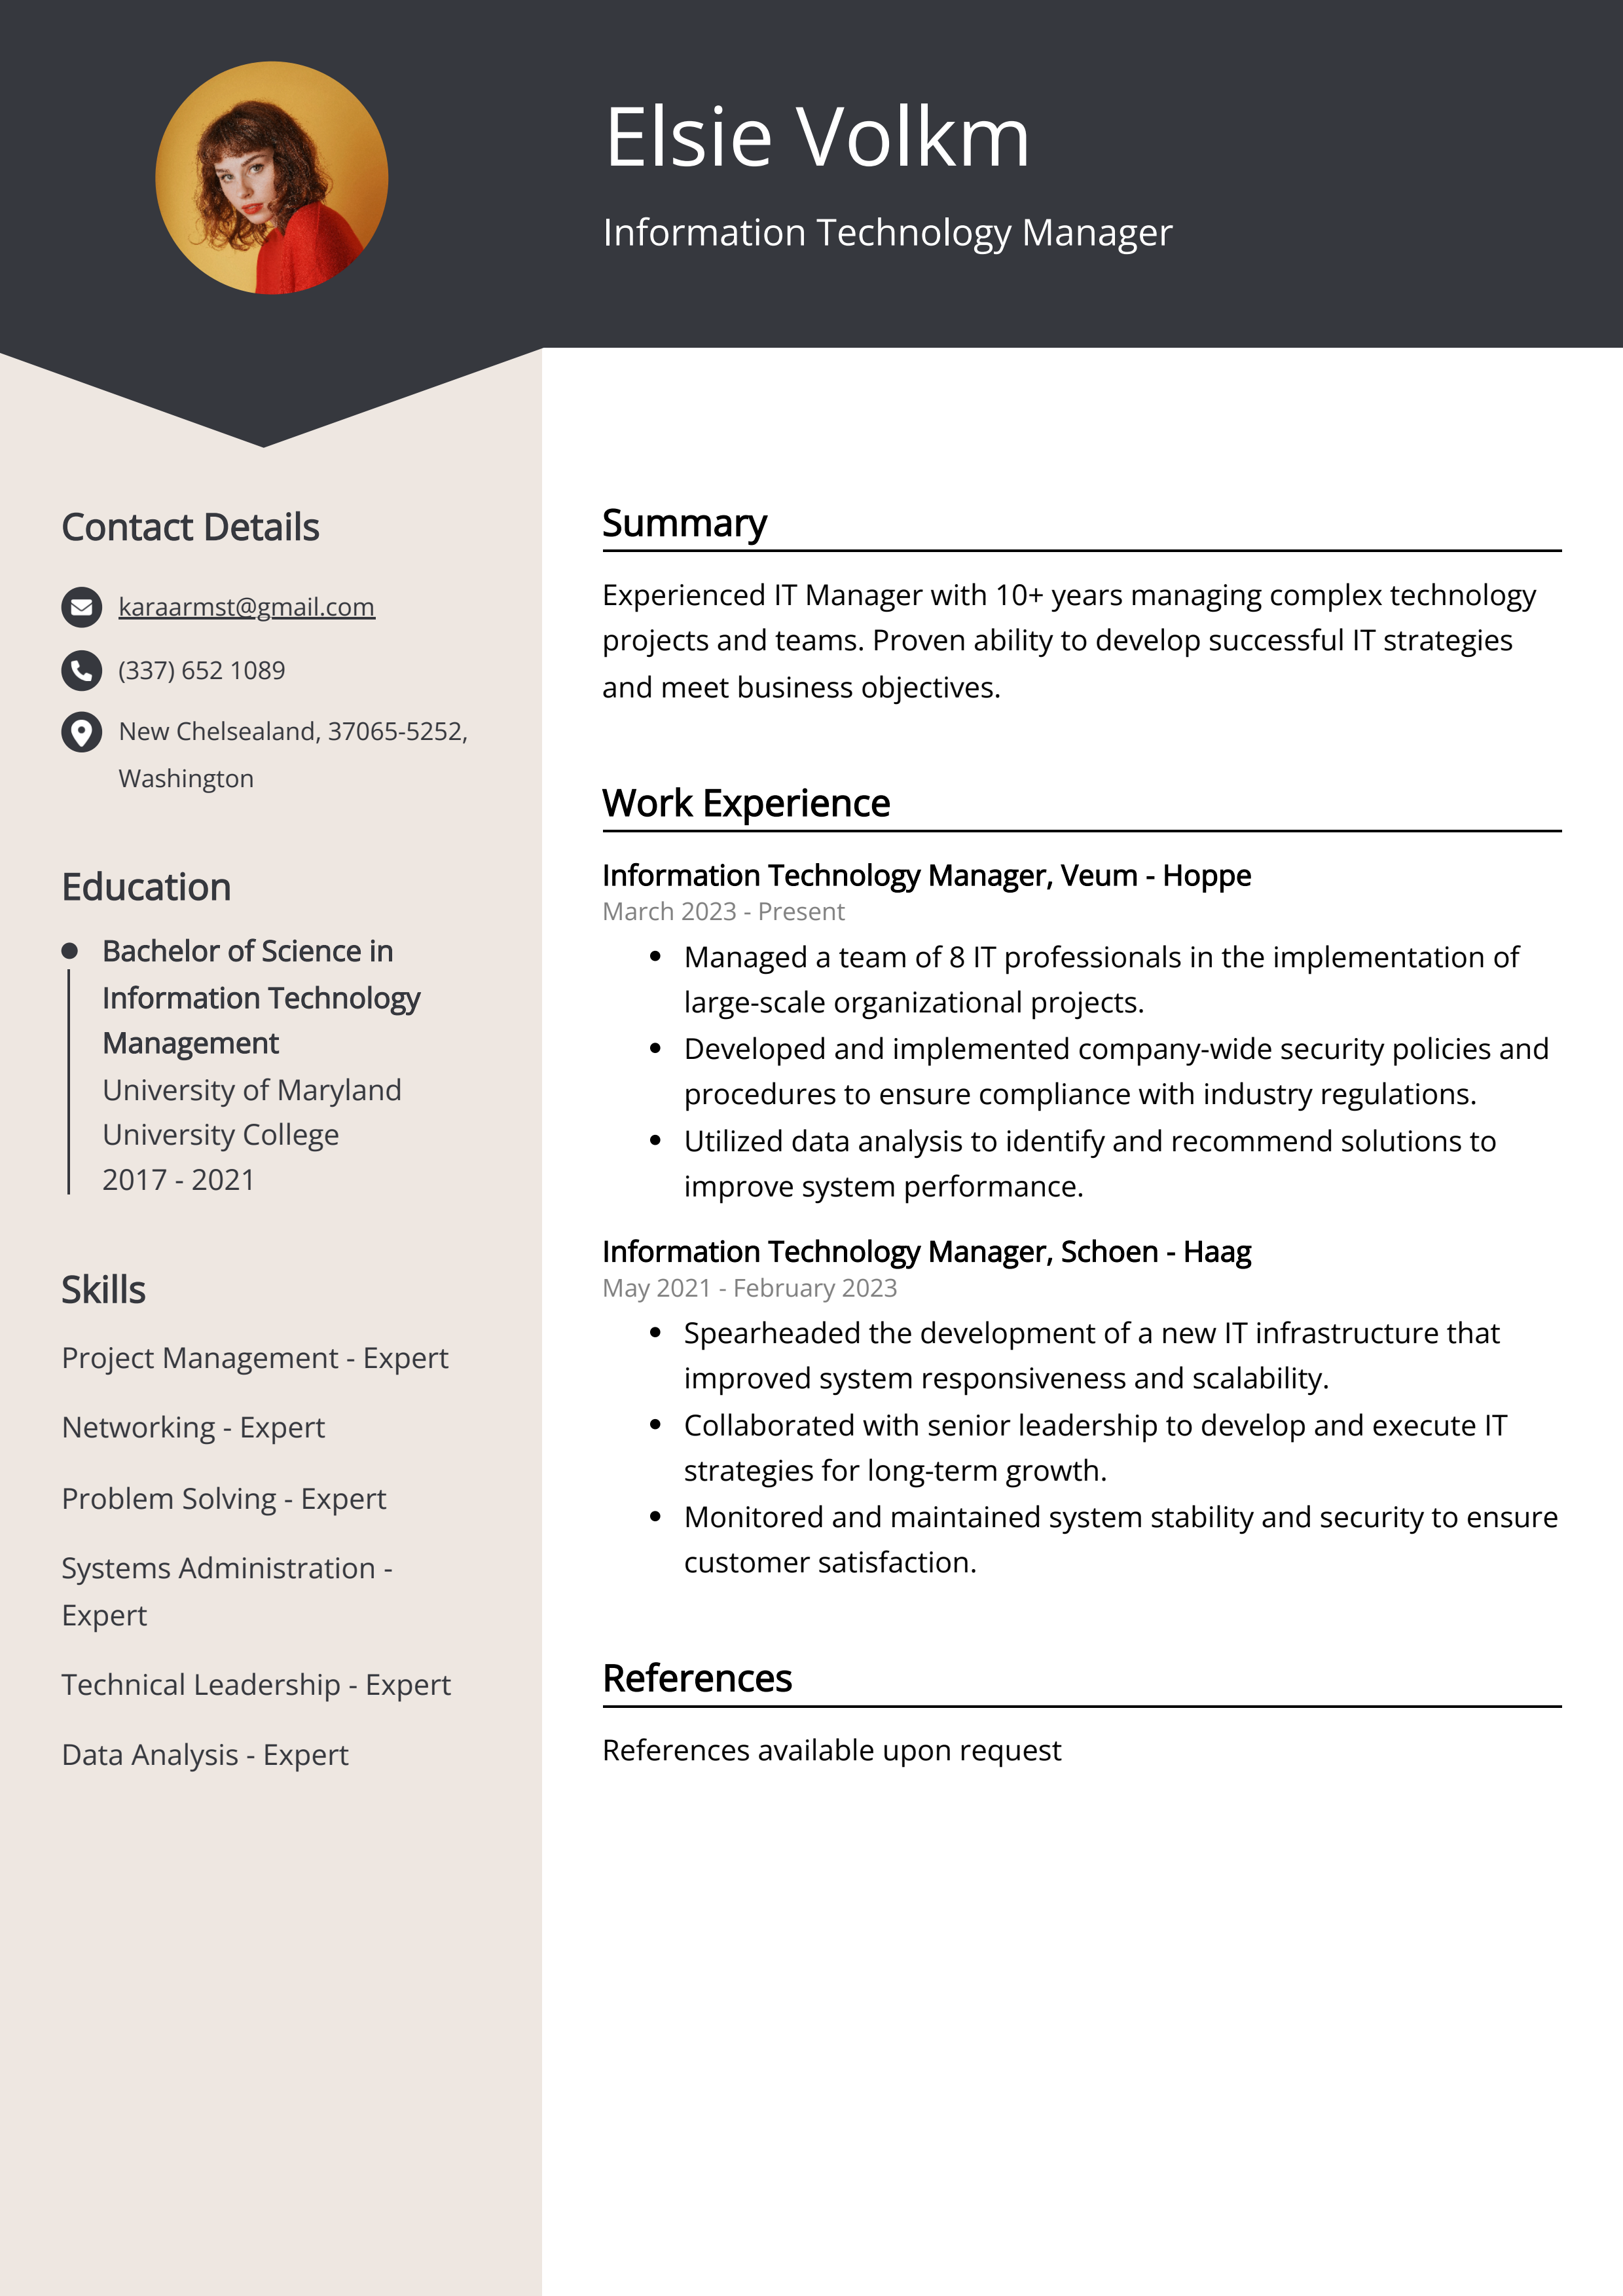 Information Technology Manager CV Example